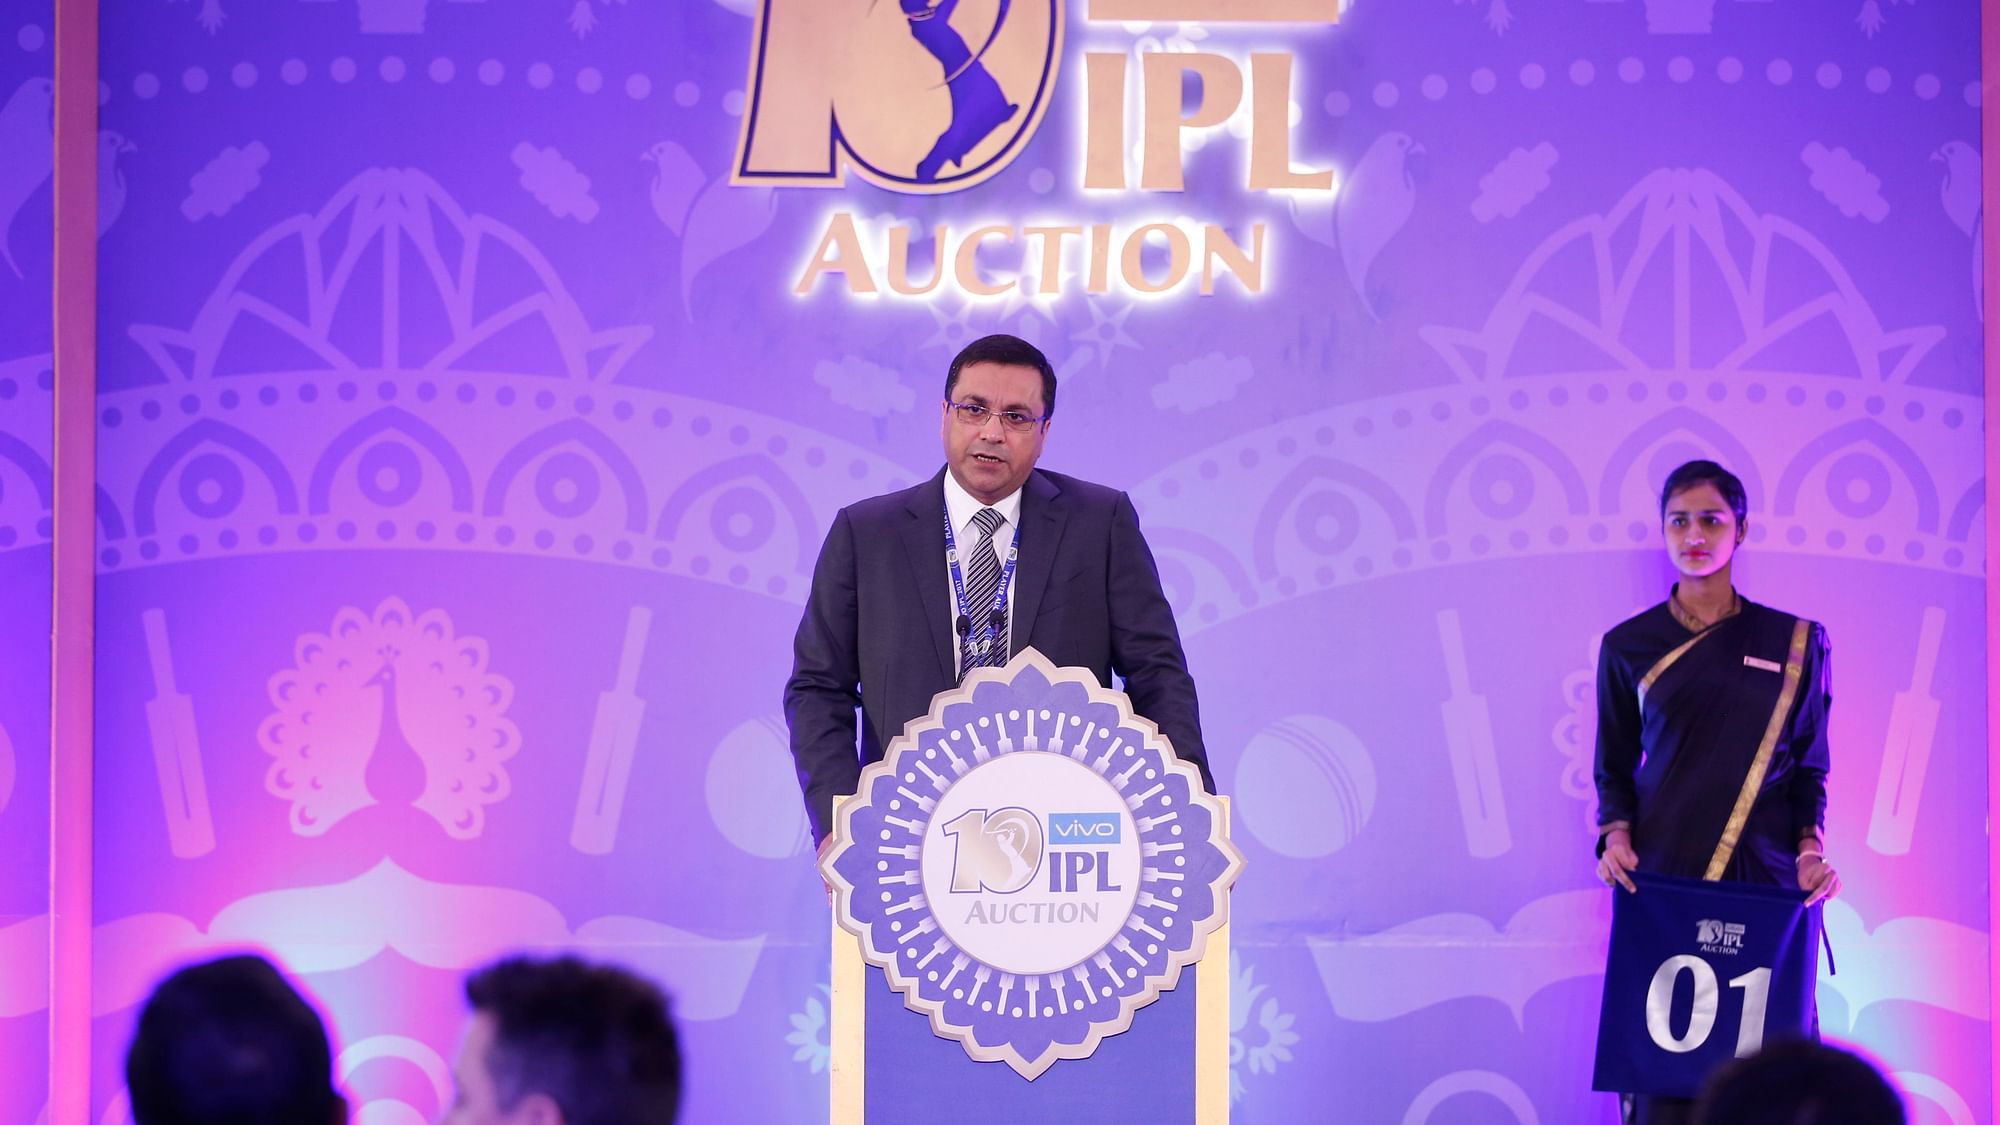 Several women had made complaints against BCCI CEO Rahul Johri following which the BCCI conducted an enquiry.